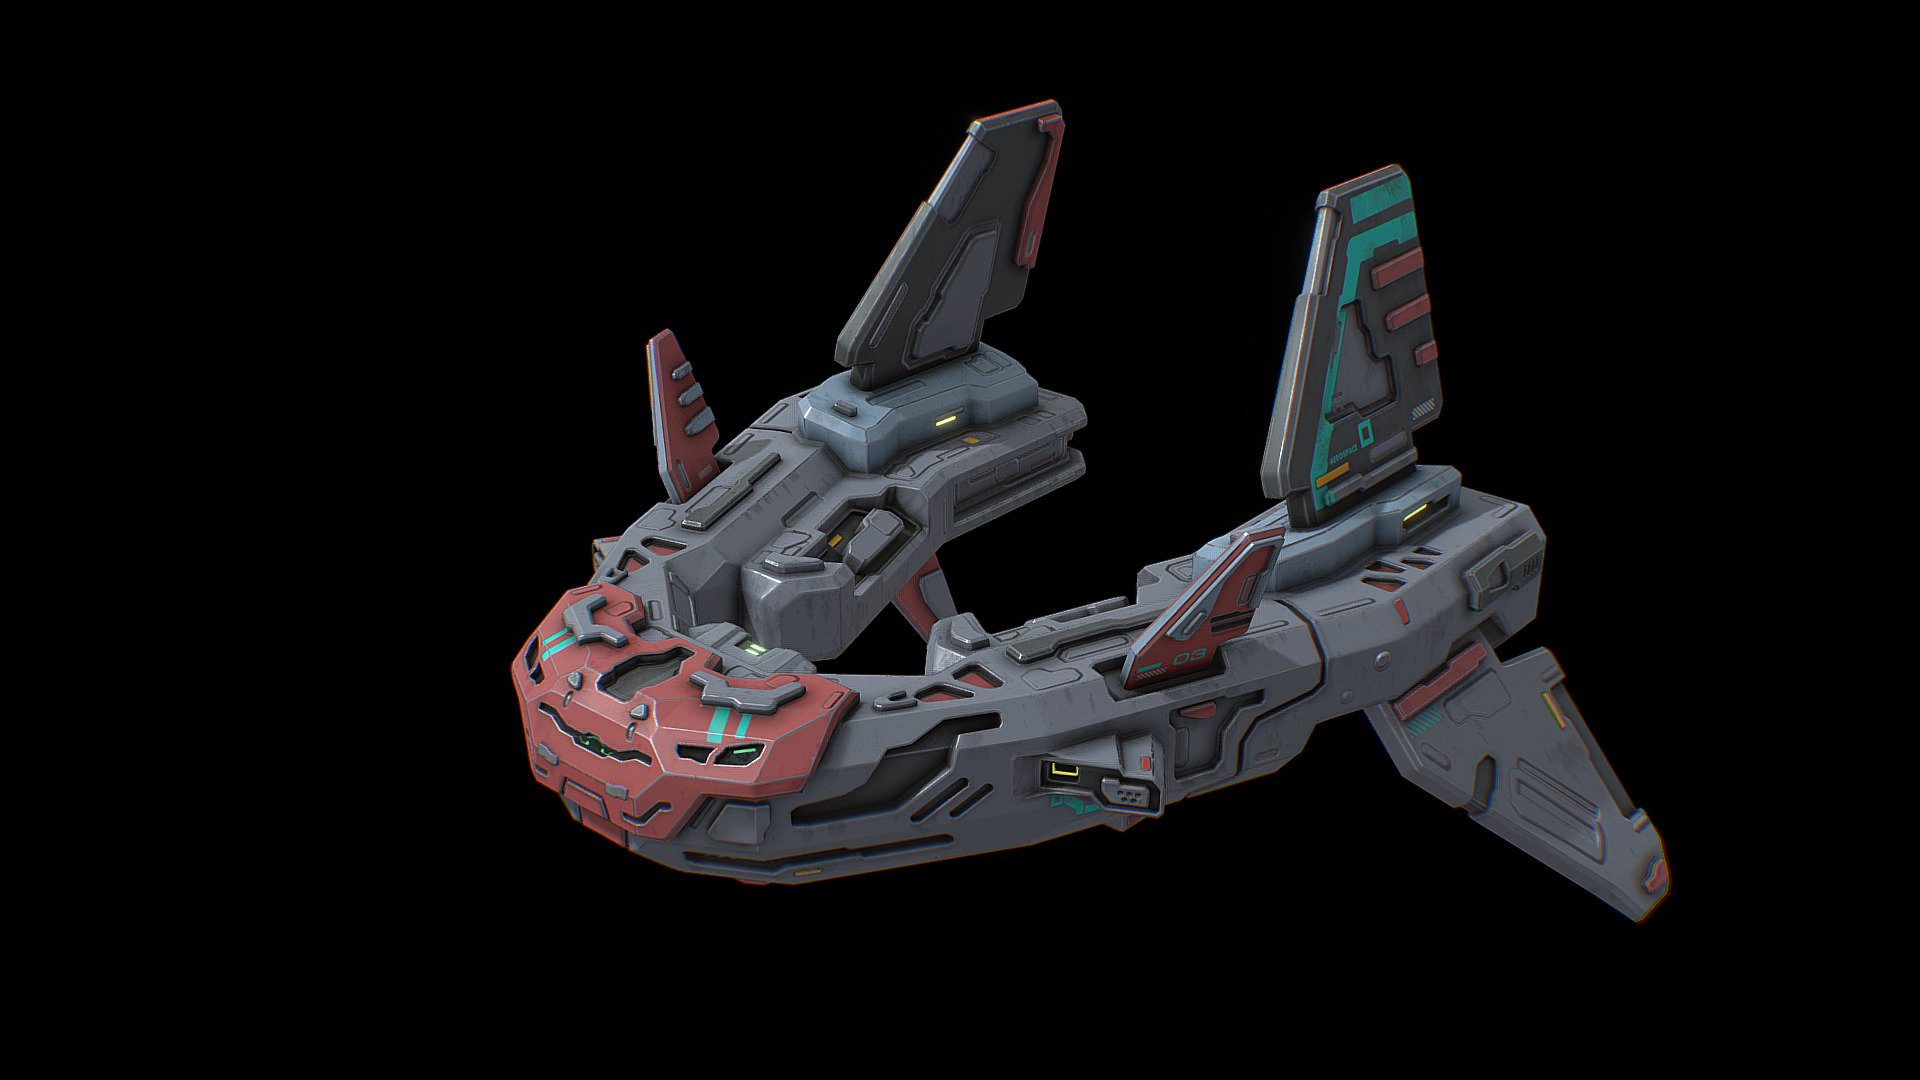 Sci fi V fighter spaceship 3d model.

18 438 tris.

File formats - blend (2.91.2), fbx, obj

Ready for games and other real time applications.

PBR textures - 4096x4096 png format

Base color map,

Normal map,

Roughness map,

Metallic map ,

Ambient Occlusion map,

Emissive map,

Also included Substance painter texture maps presets for:

Unreal Engine 4,

Unity (Standart Metallic) 3d model